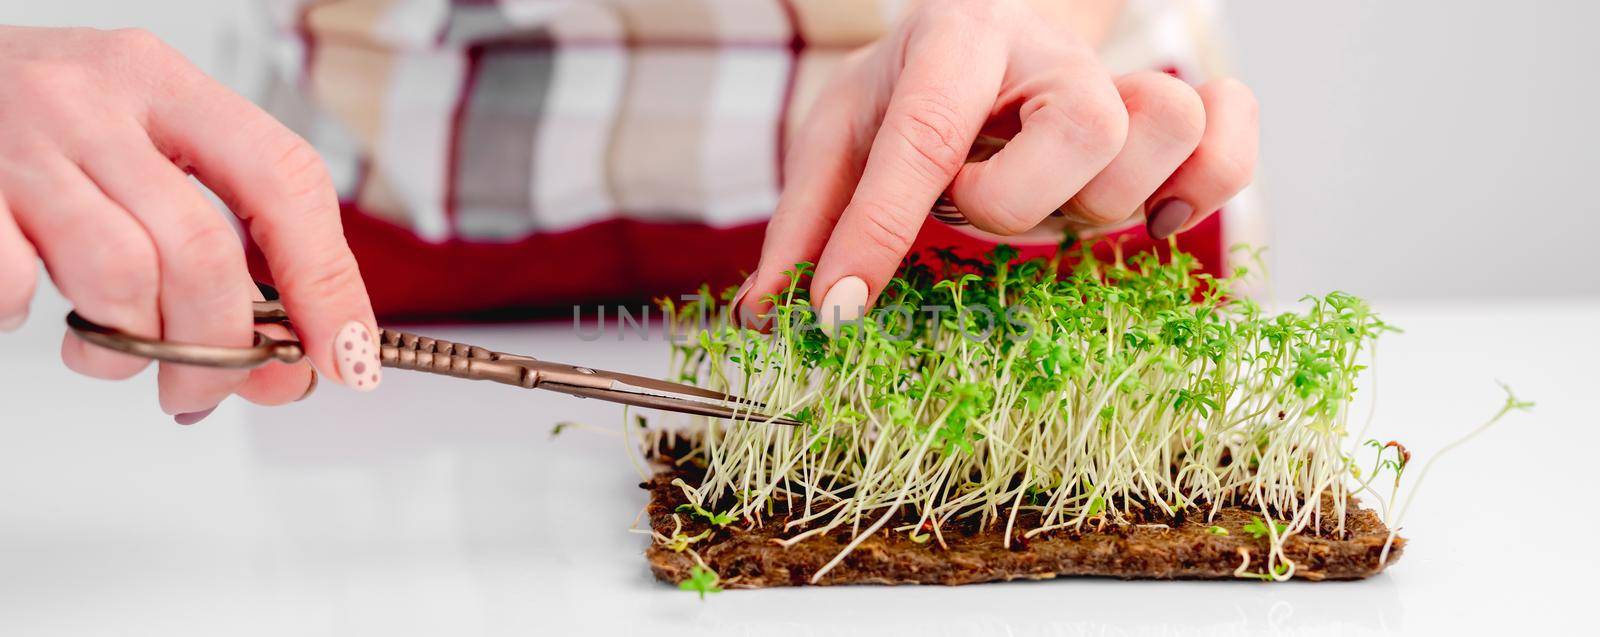 Hands cut organic growing flax microgreens with scissors at the kitchen